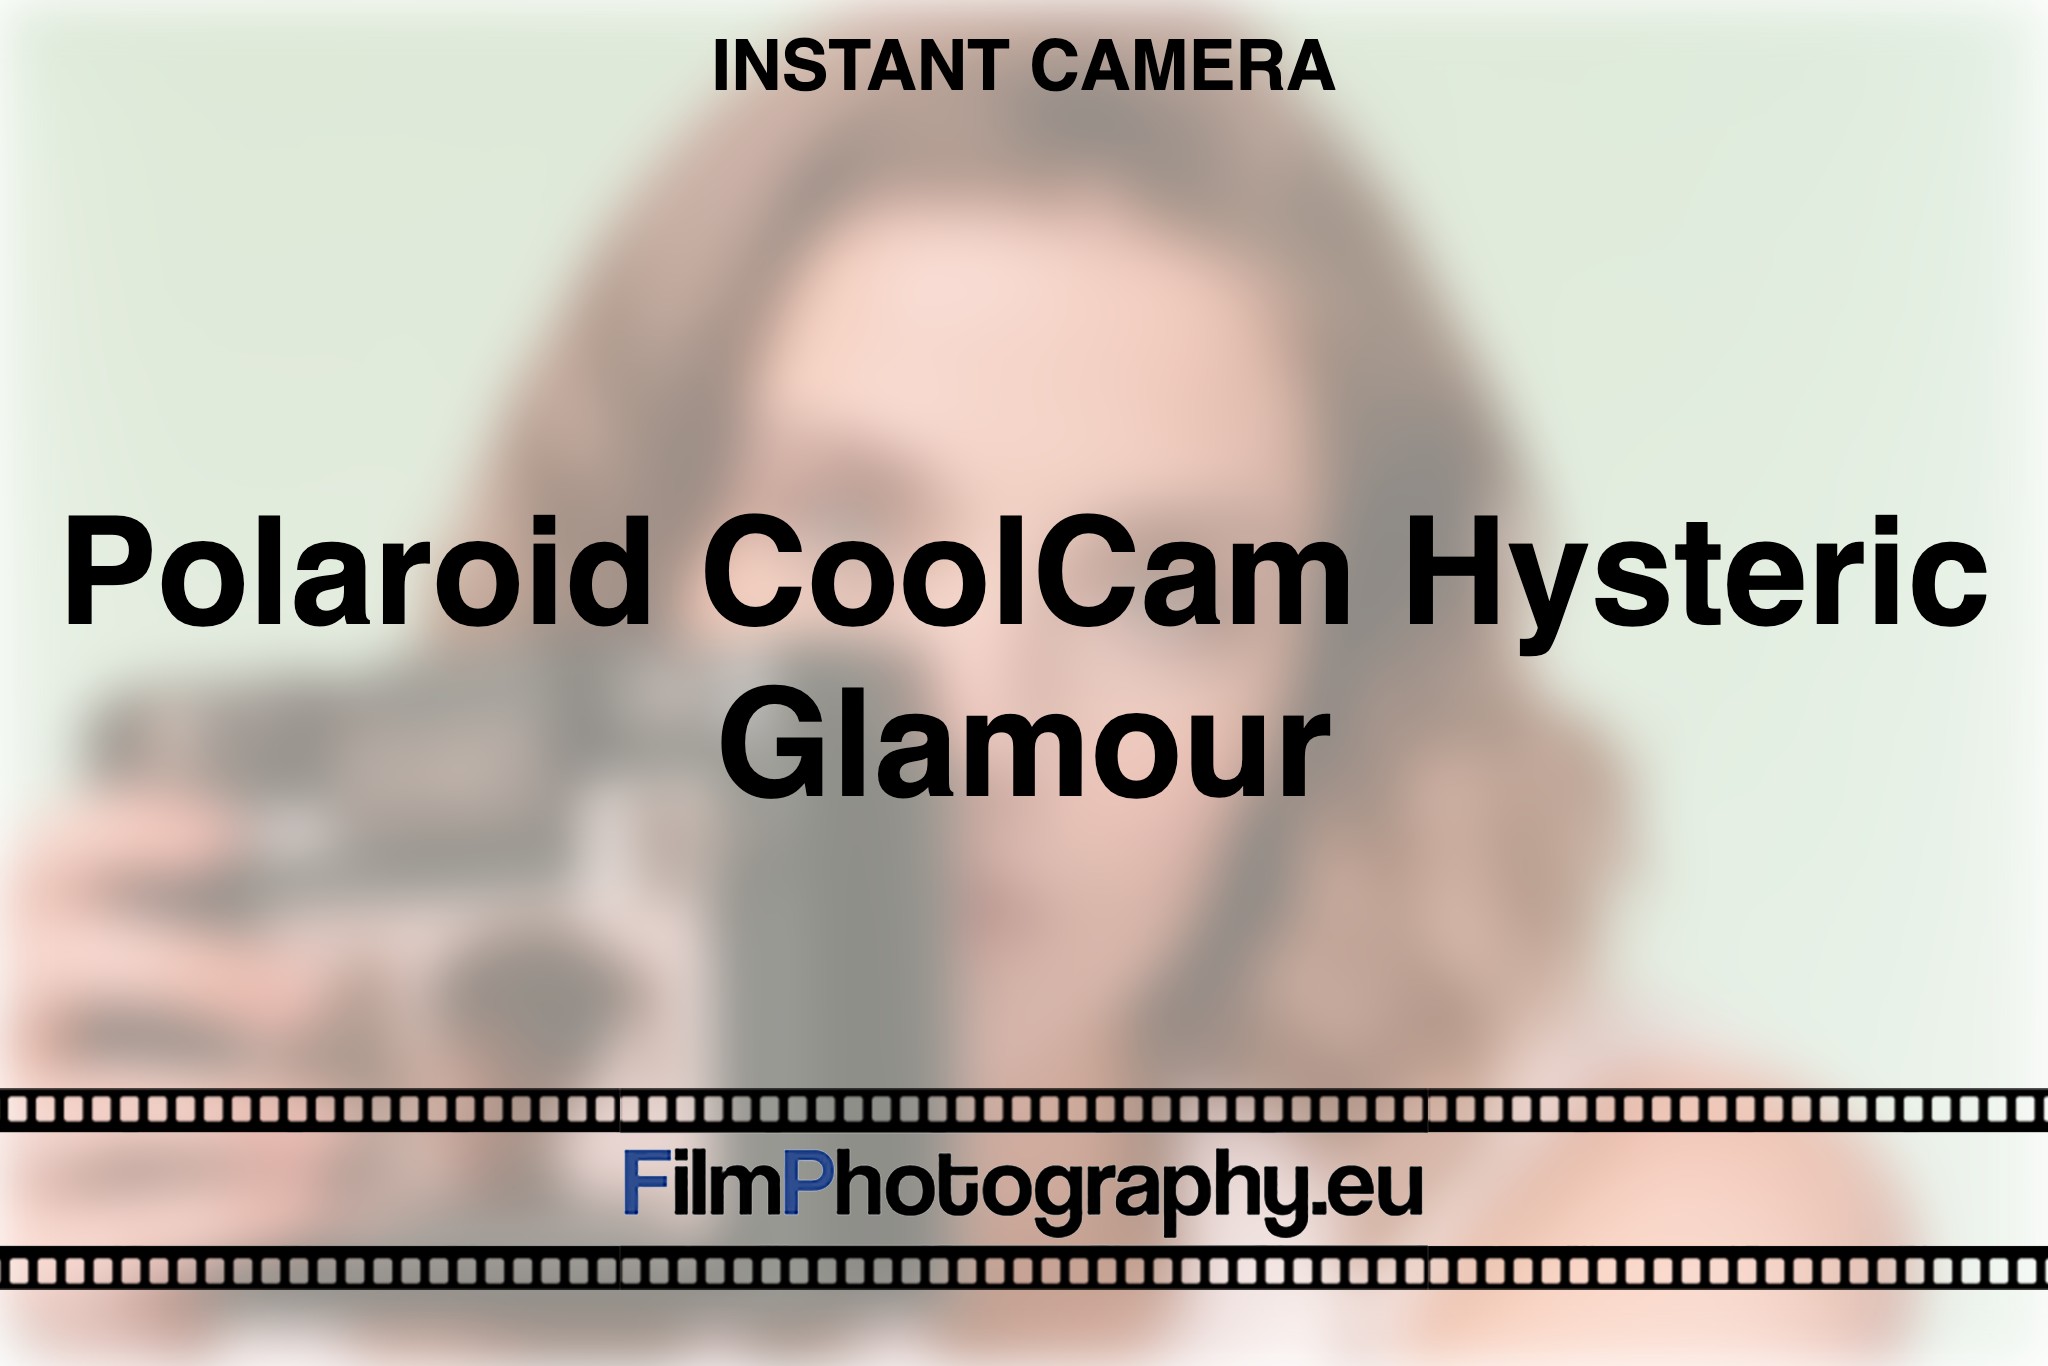 polaroid-coolcam-hysteric-glamour-instant-camera-bnv